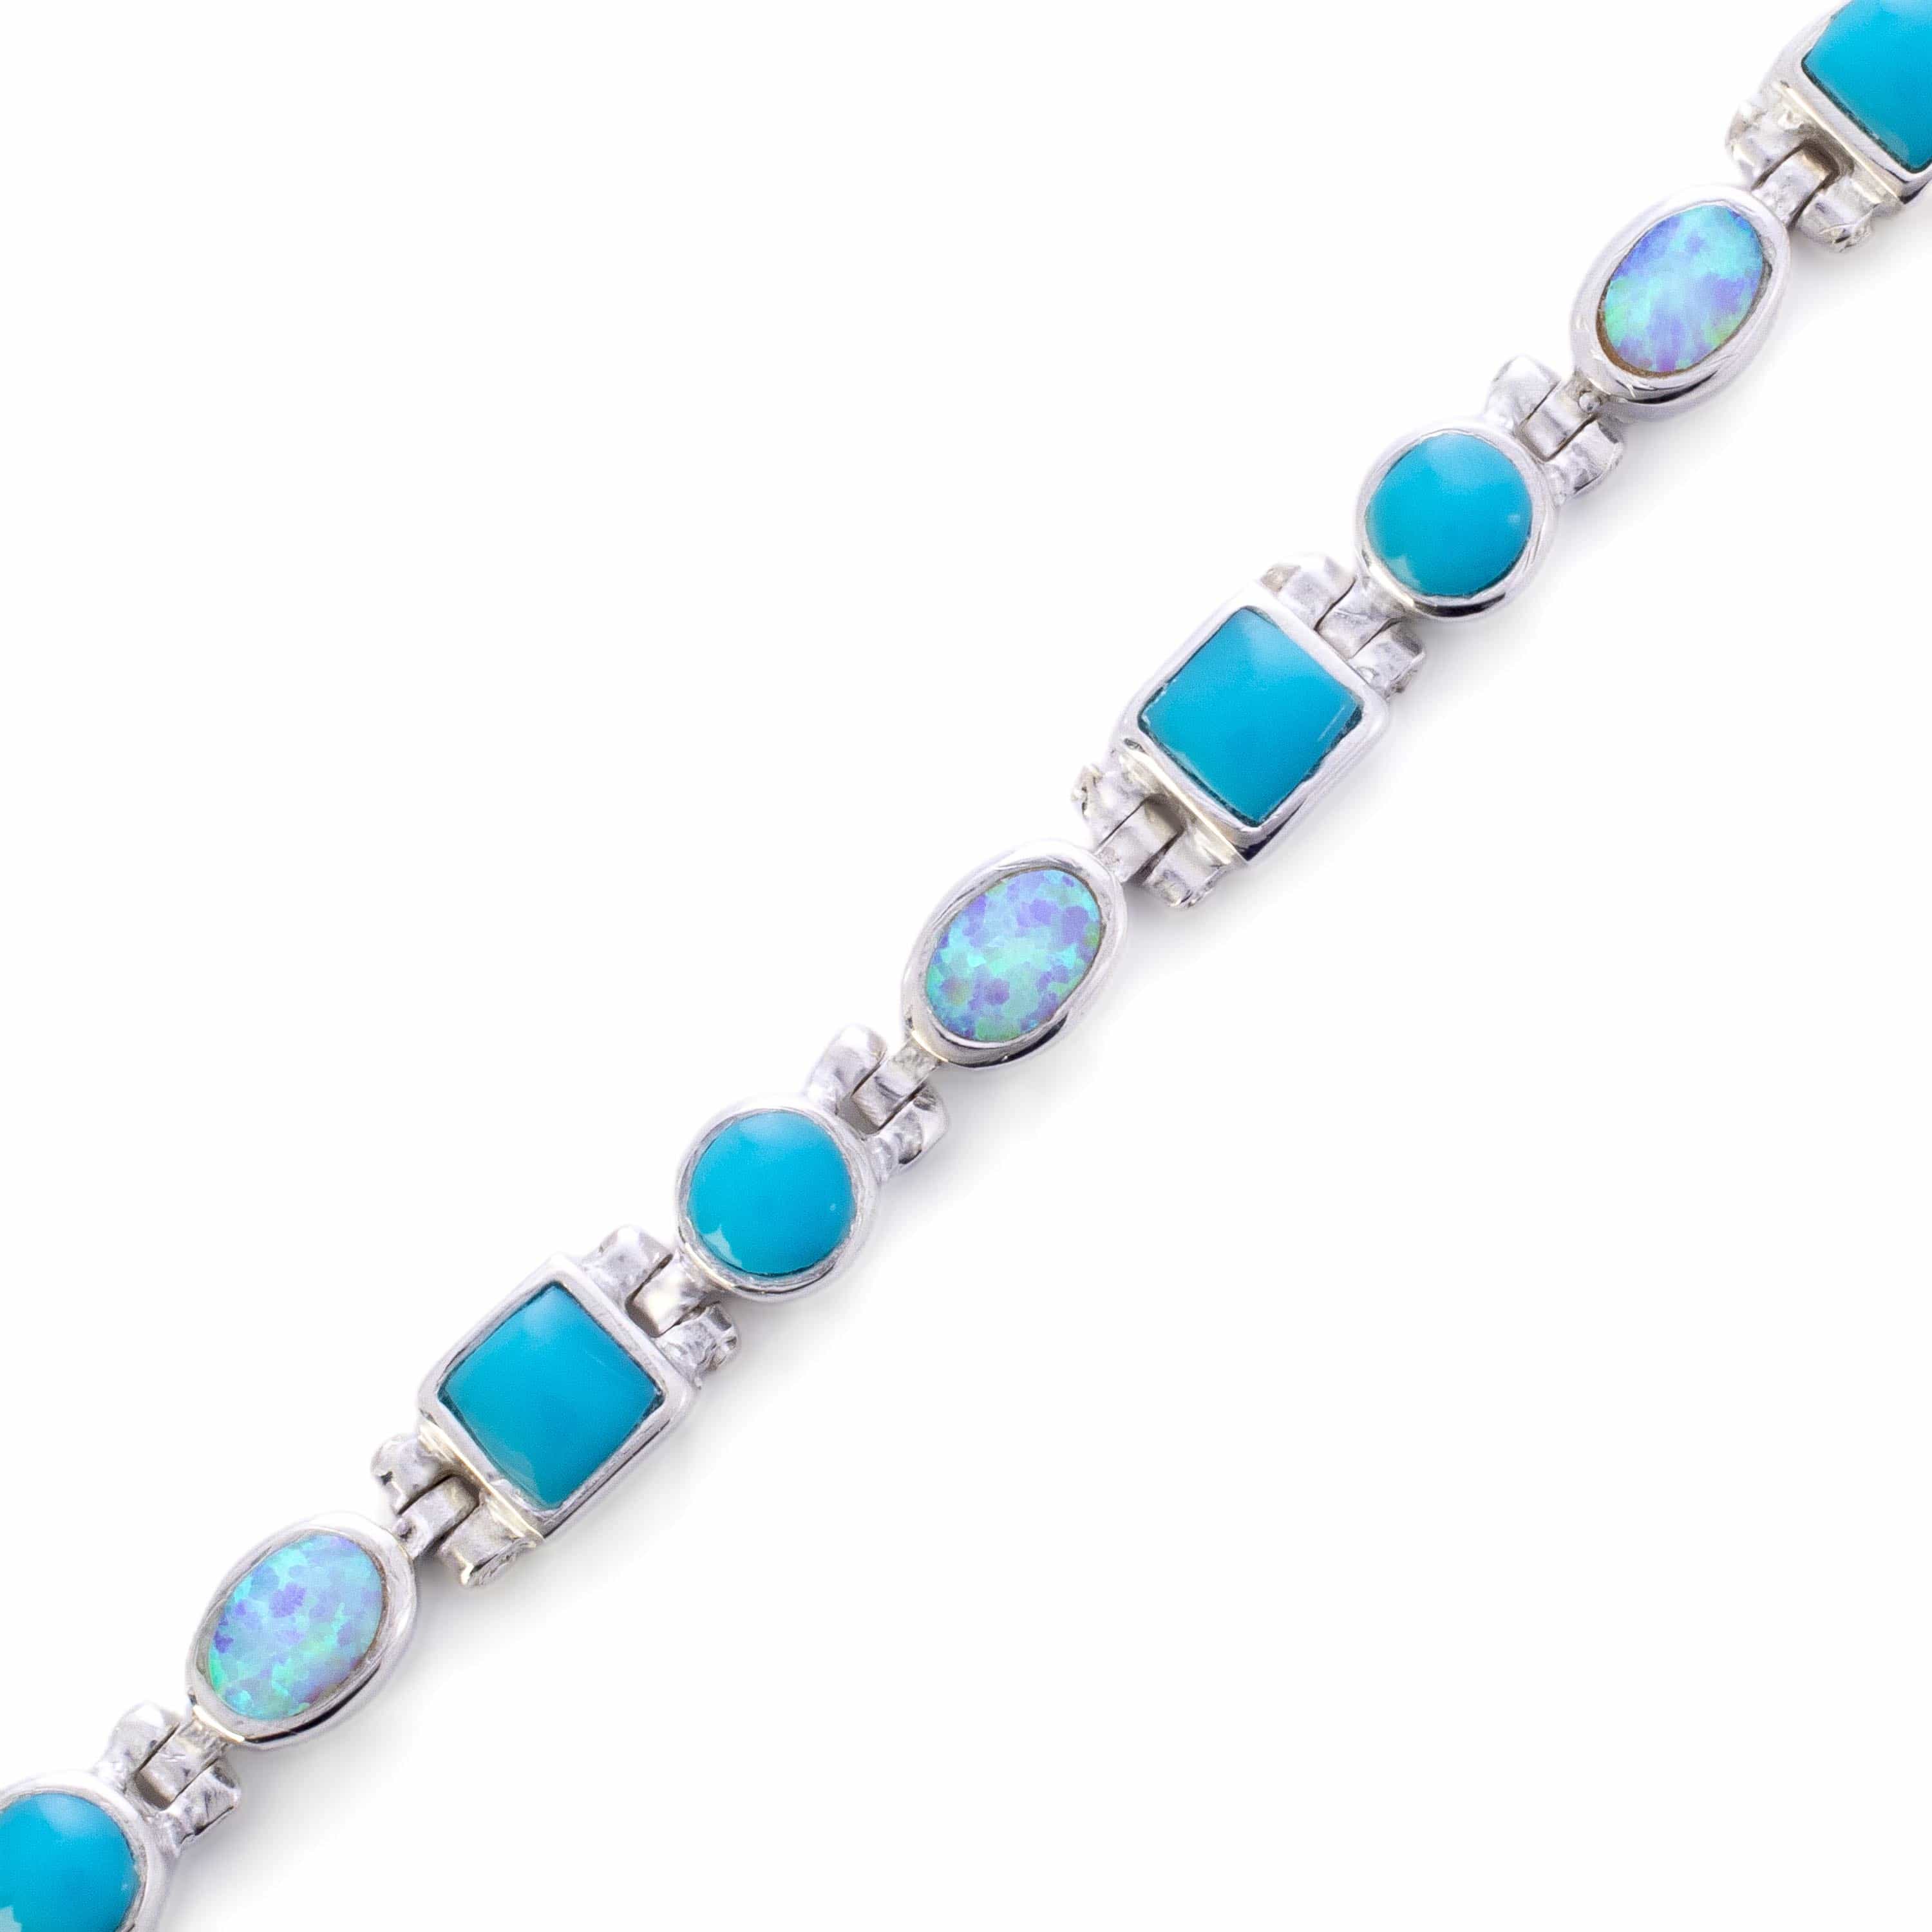 Kalifano Southwest Silver Jewelry Turquoise and Opal 925 Sterling Silver Bracelet USA Handmade NMB.0548.TQ